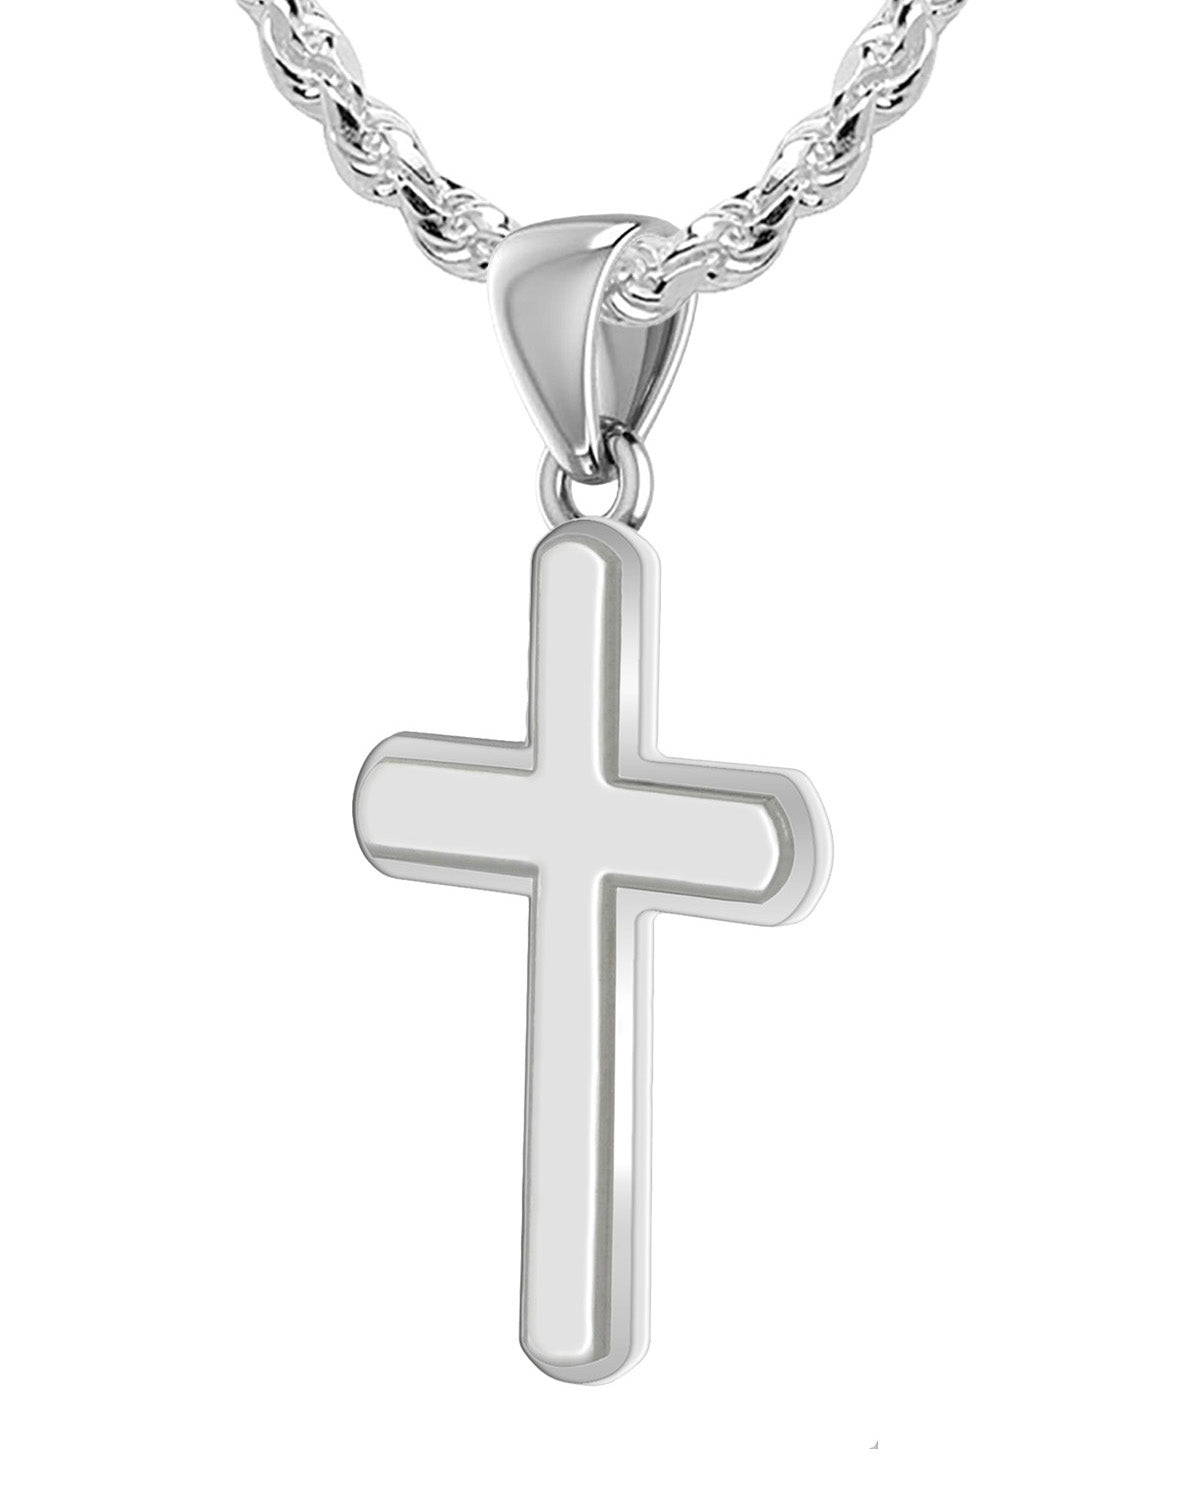 1 3/8in Solid 925 Sterling Silver High Polished Cross Pendant Necklace - US Jewels